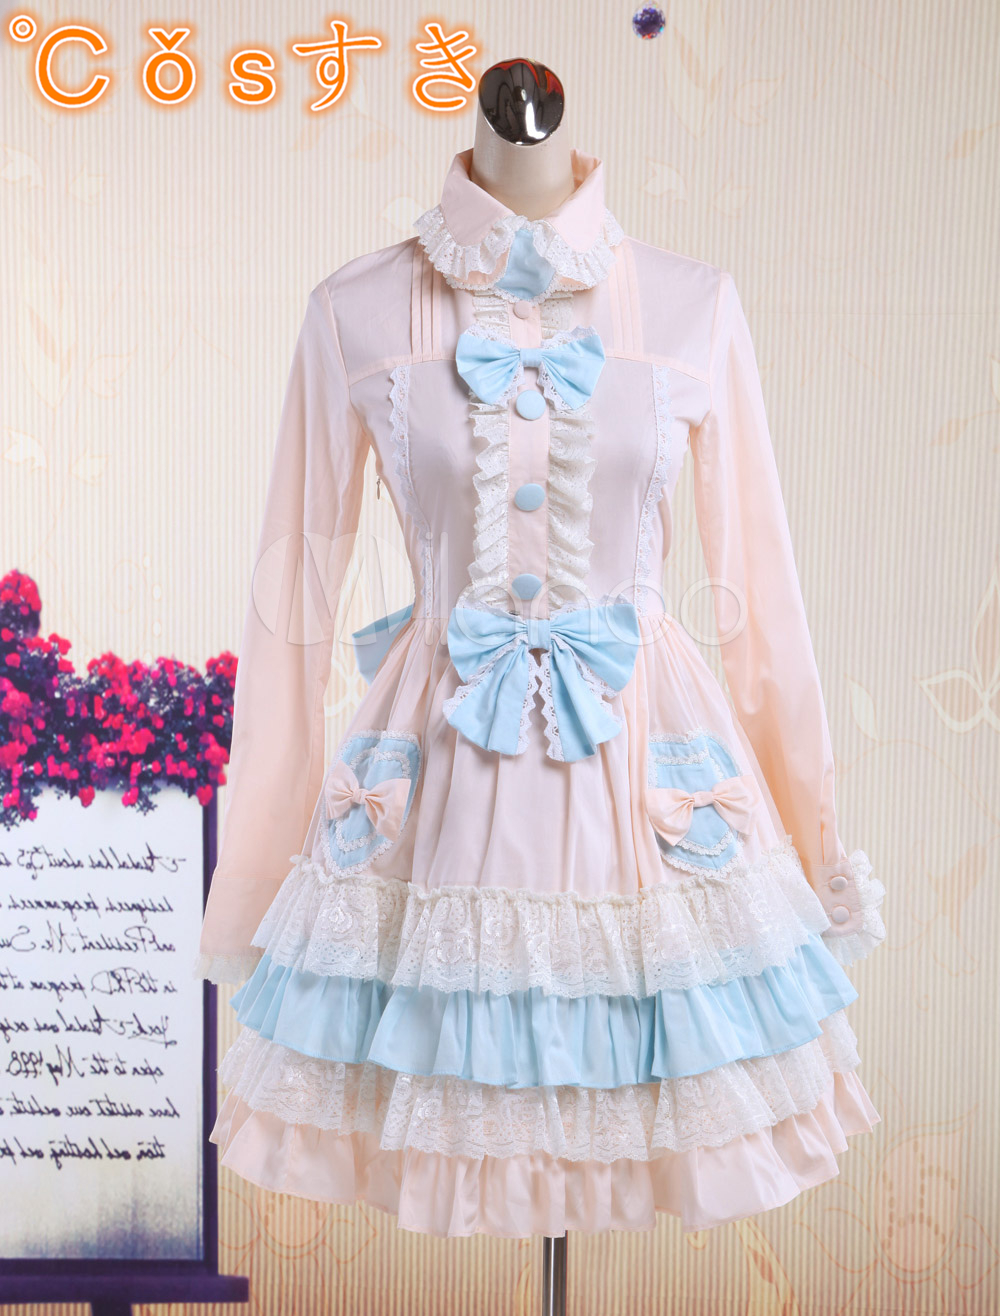 Free shipping! Newest! High - quality! Classic Long Sleeves Bow Decoration Cotton Sweet Lolita Dress